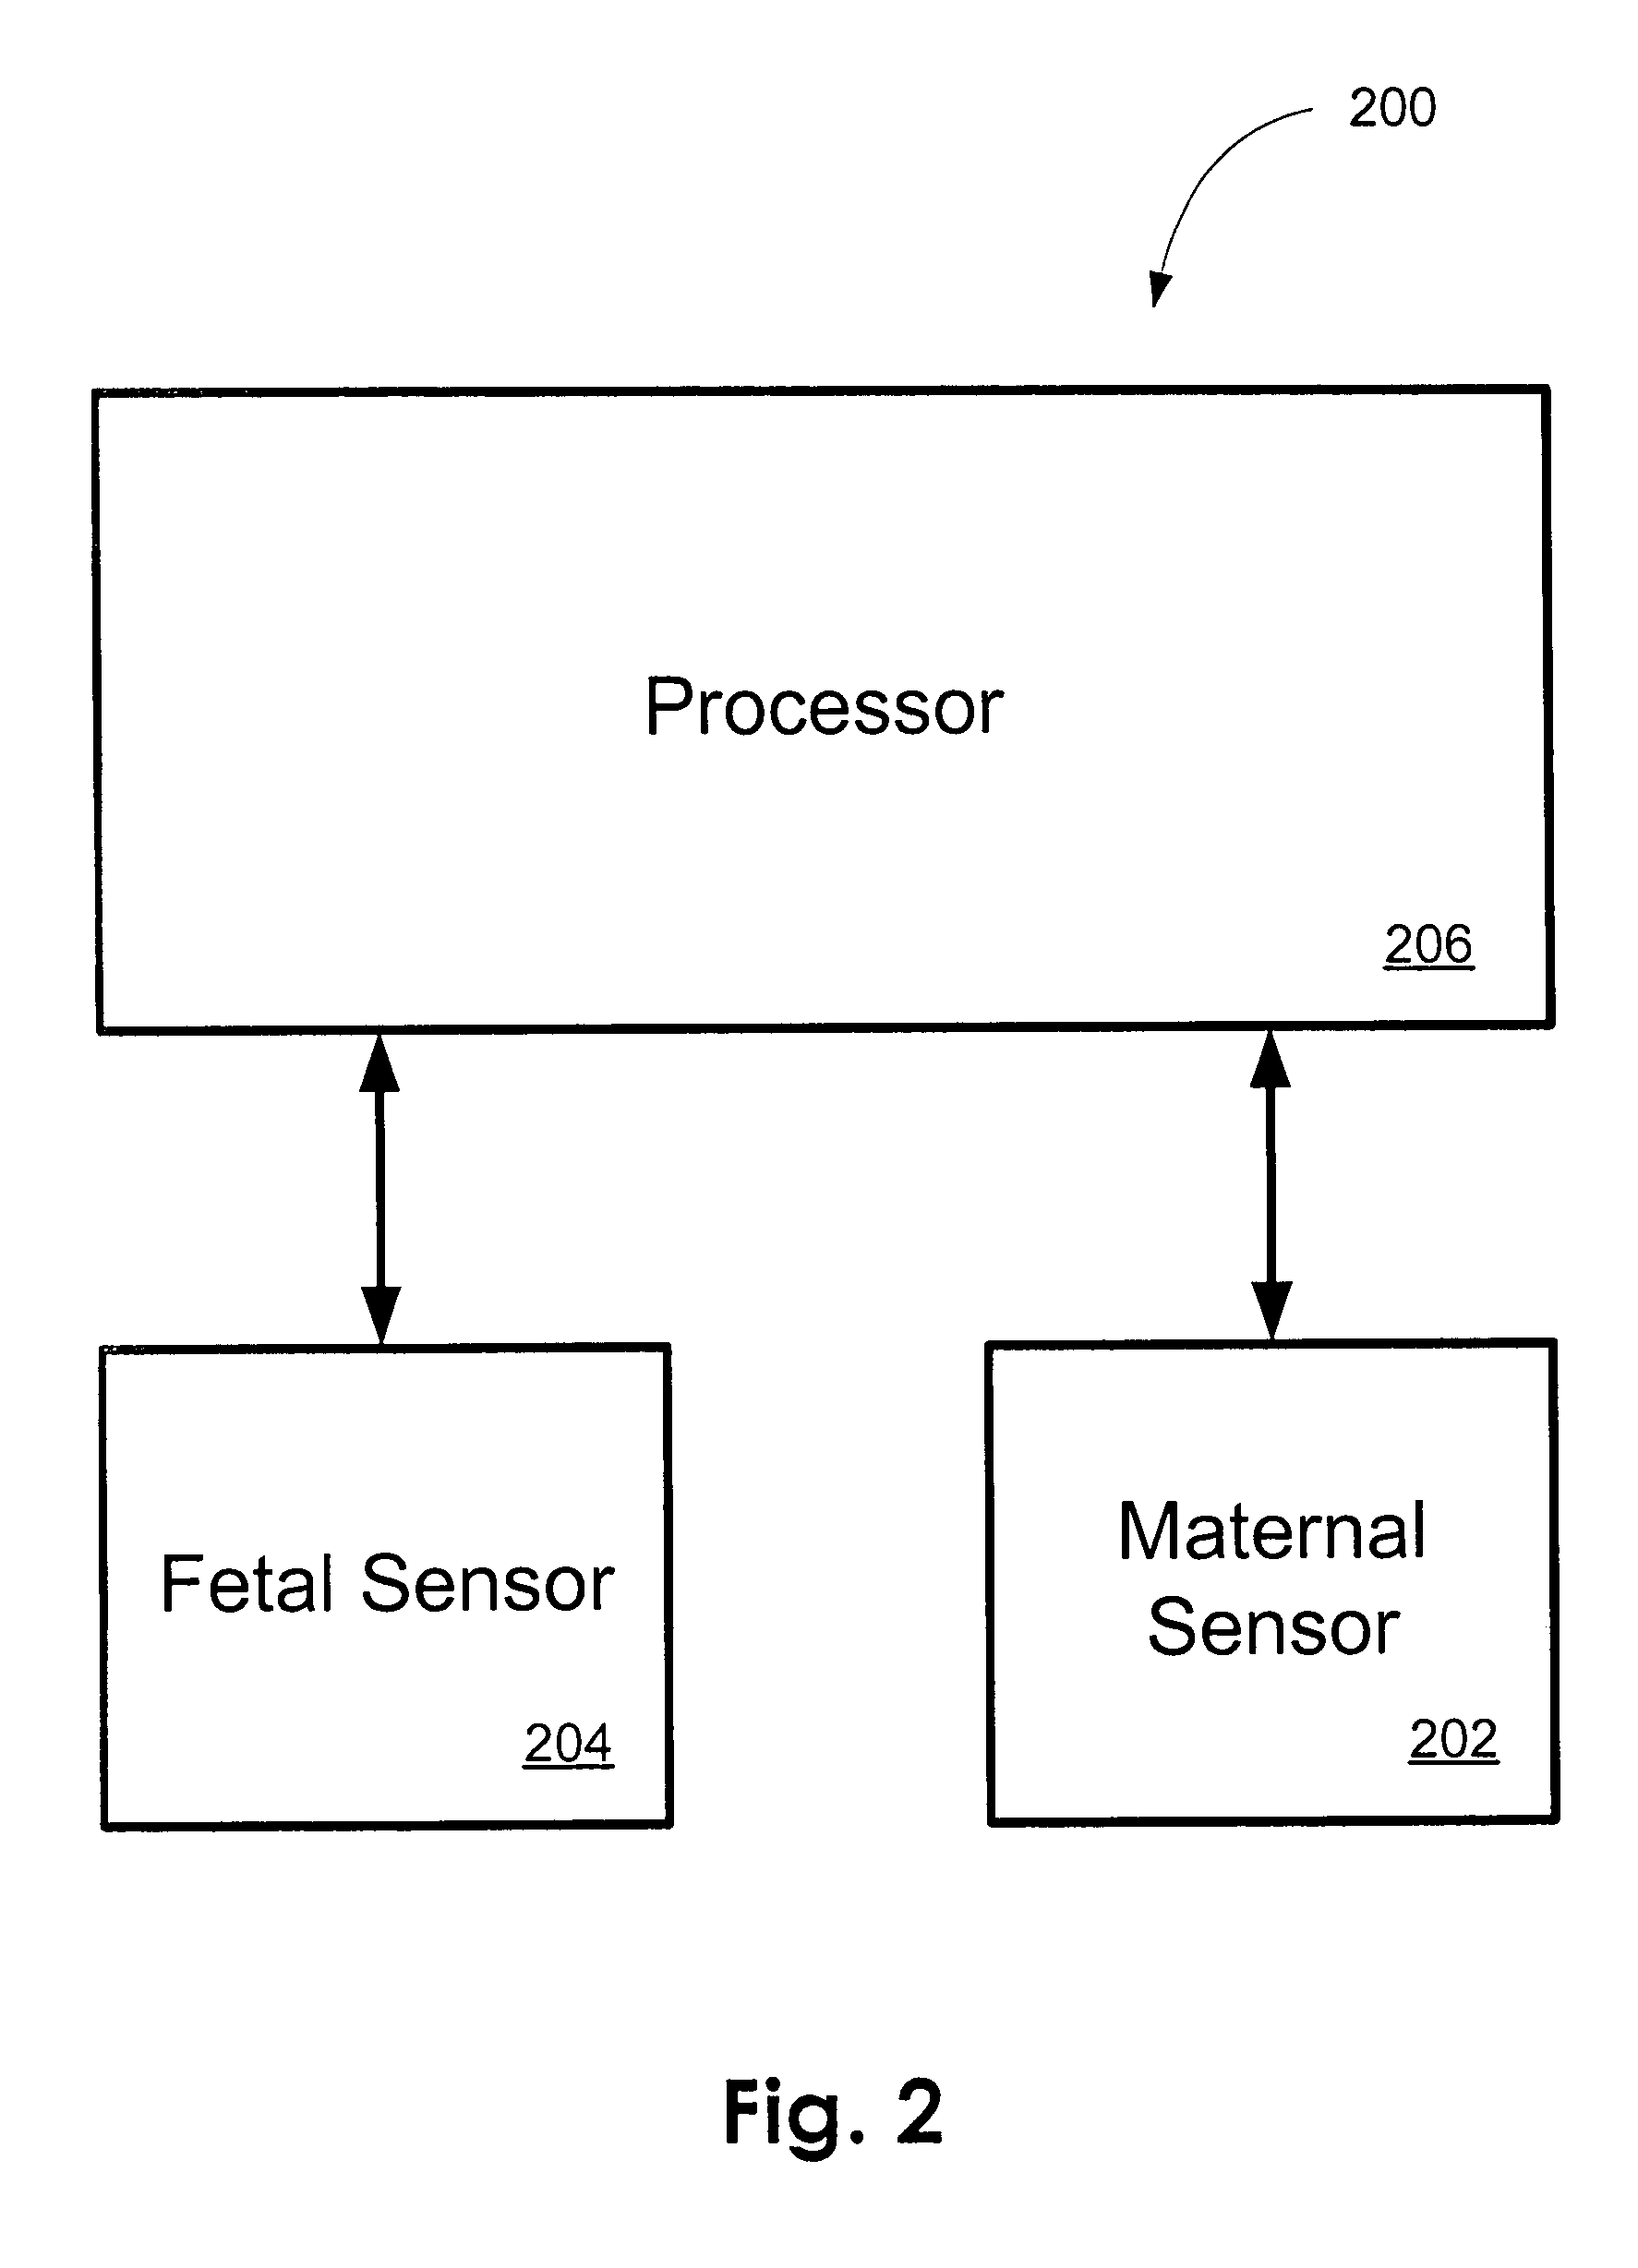 Method and apparatus for predicting material hypertension during pregnancy using coherence analysis of material and fetal blood velocity waveforms